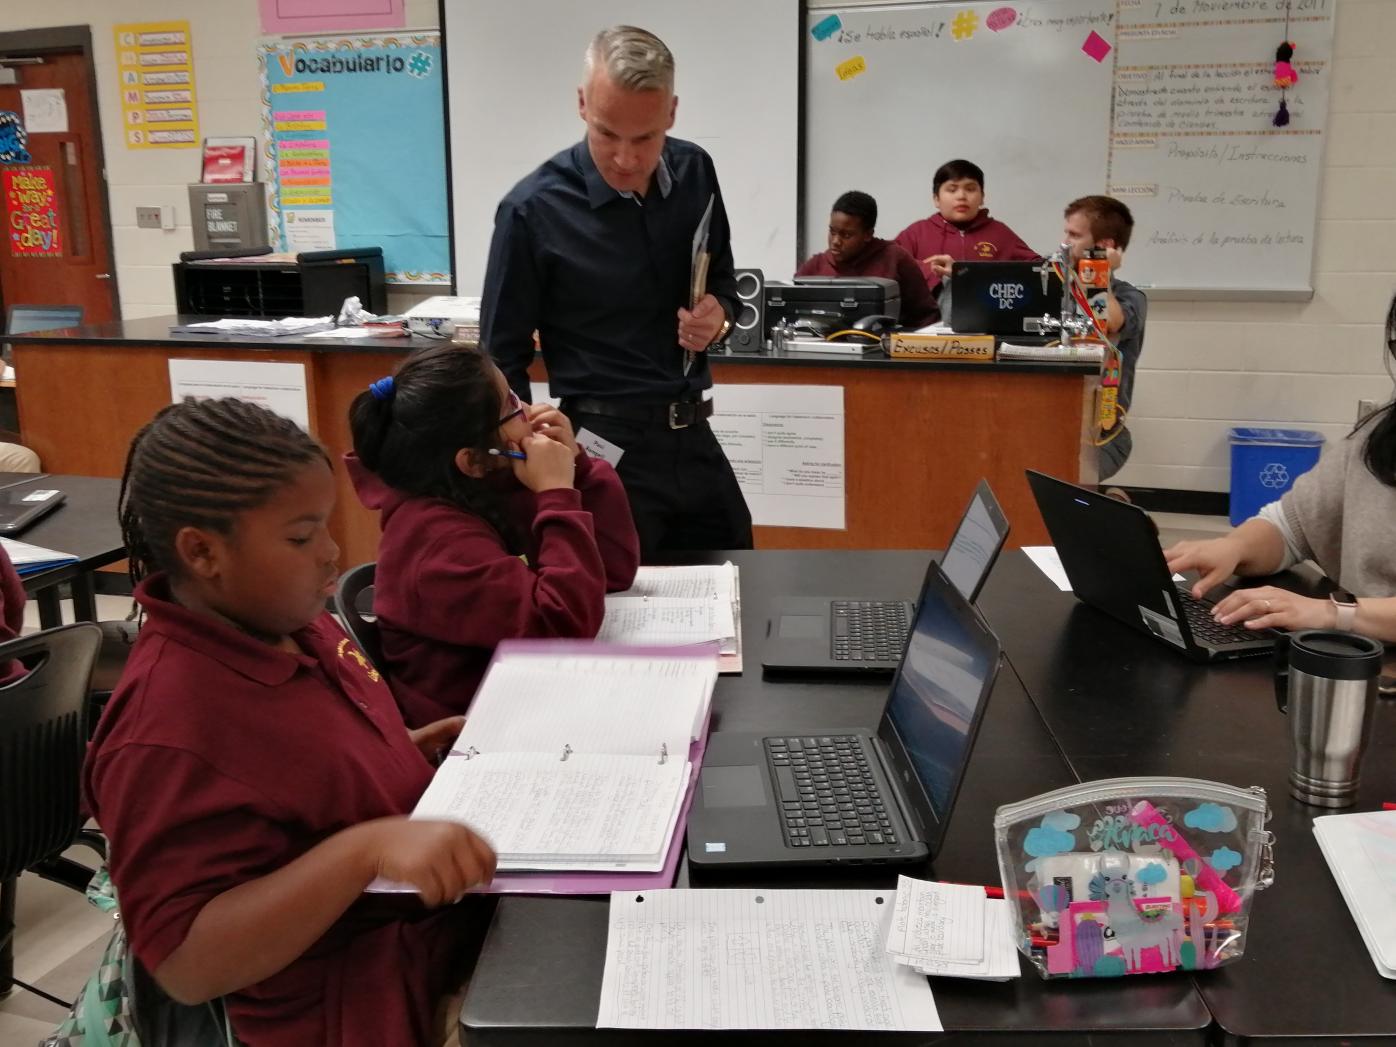 FLGS Travel Grantee Pasi Rangell in a U.S. classroom with students